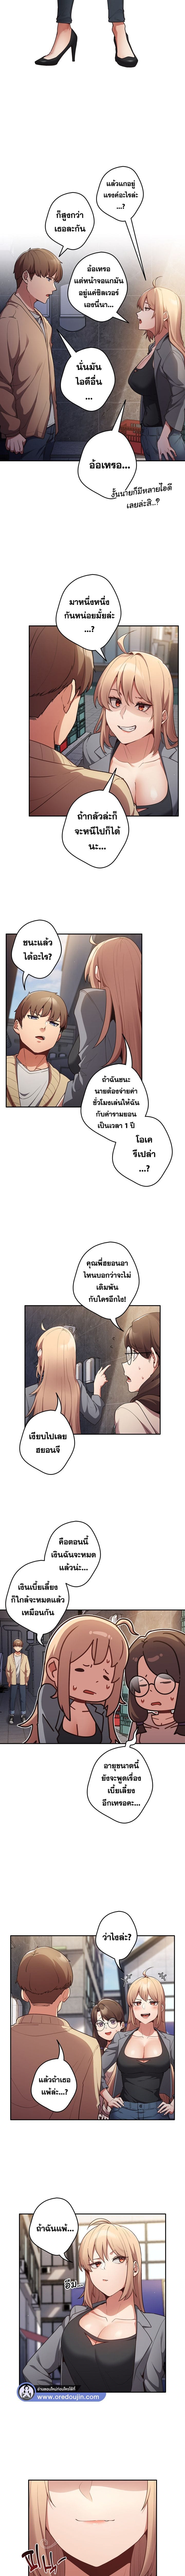 That’s Not How You Do It ตอนที่ 1 ภาพ 7